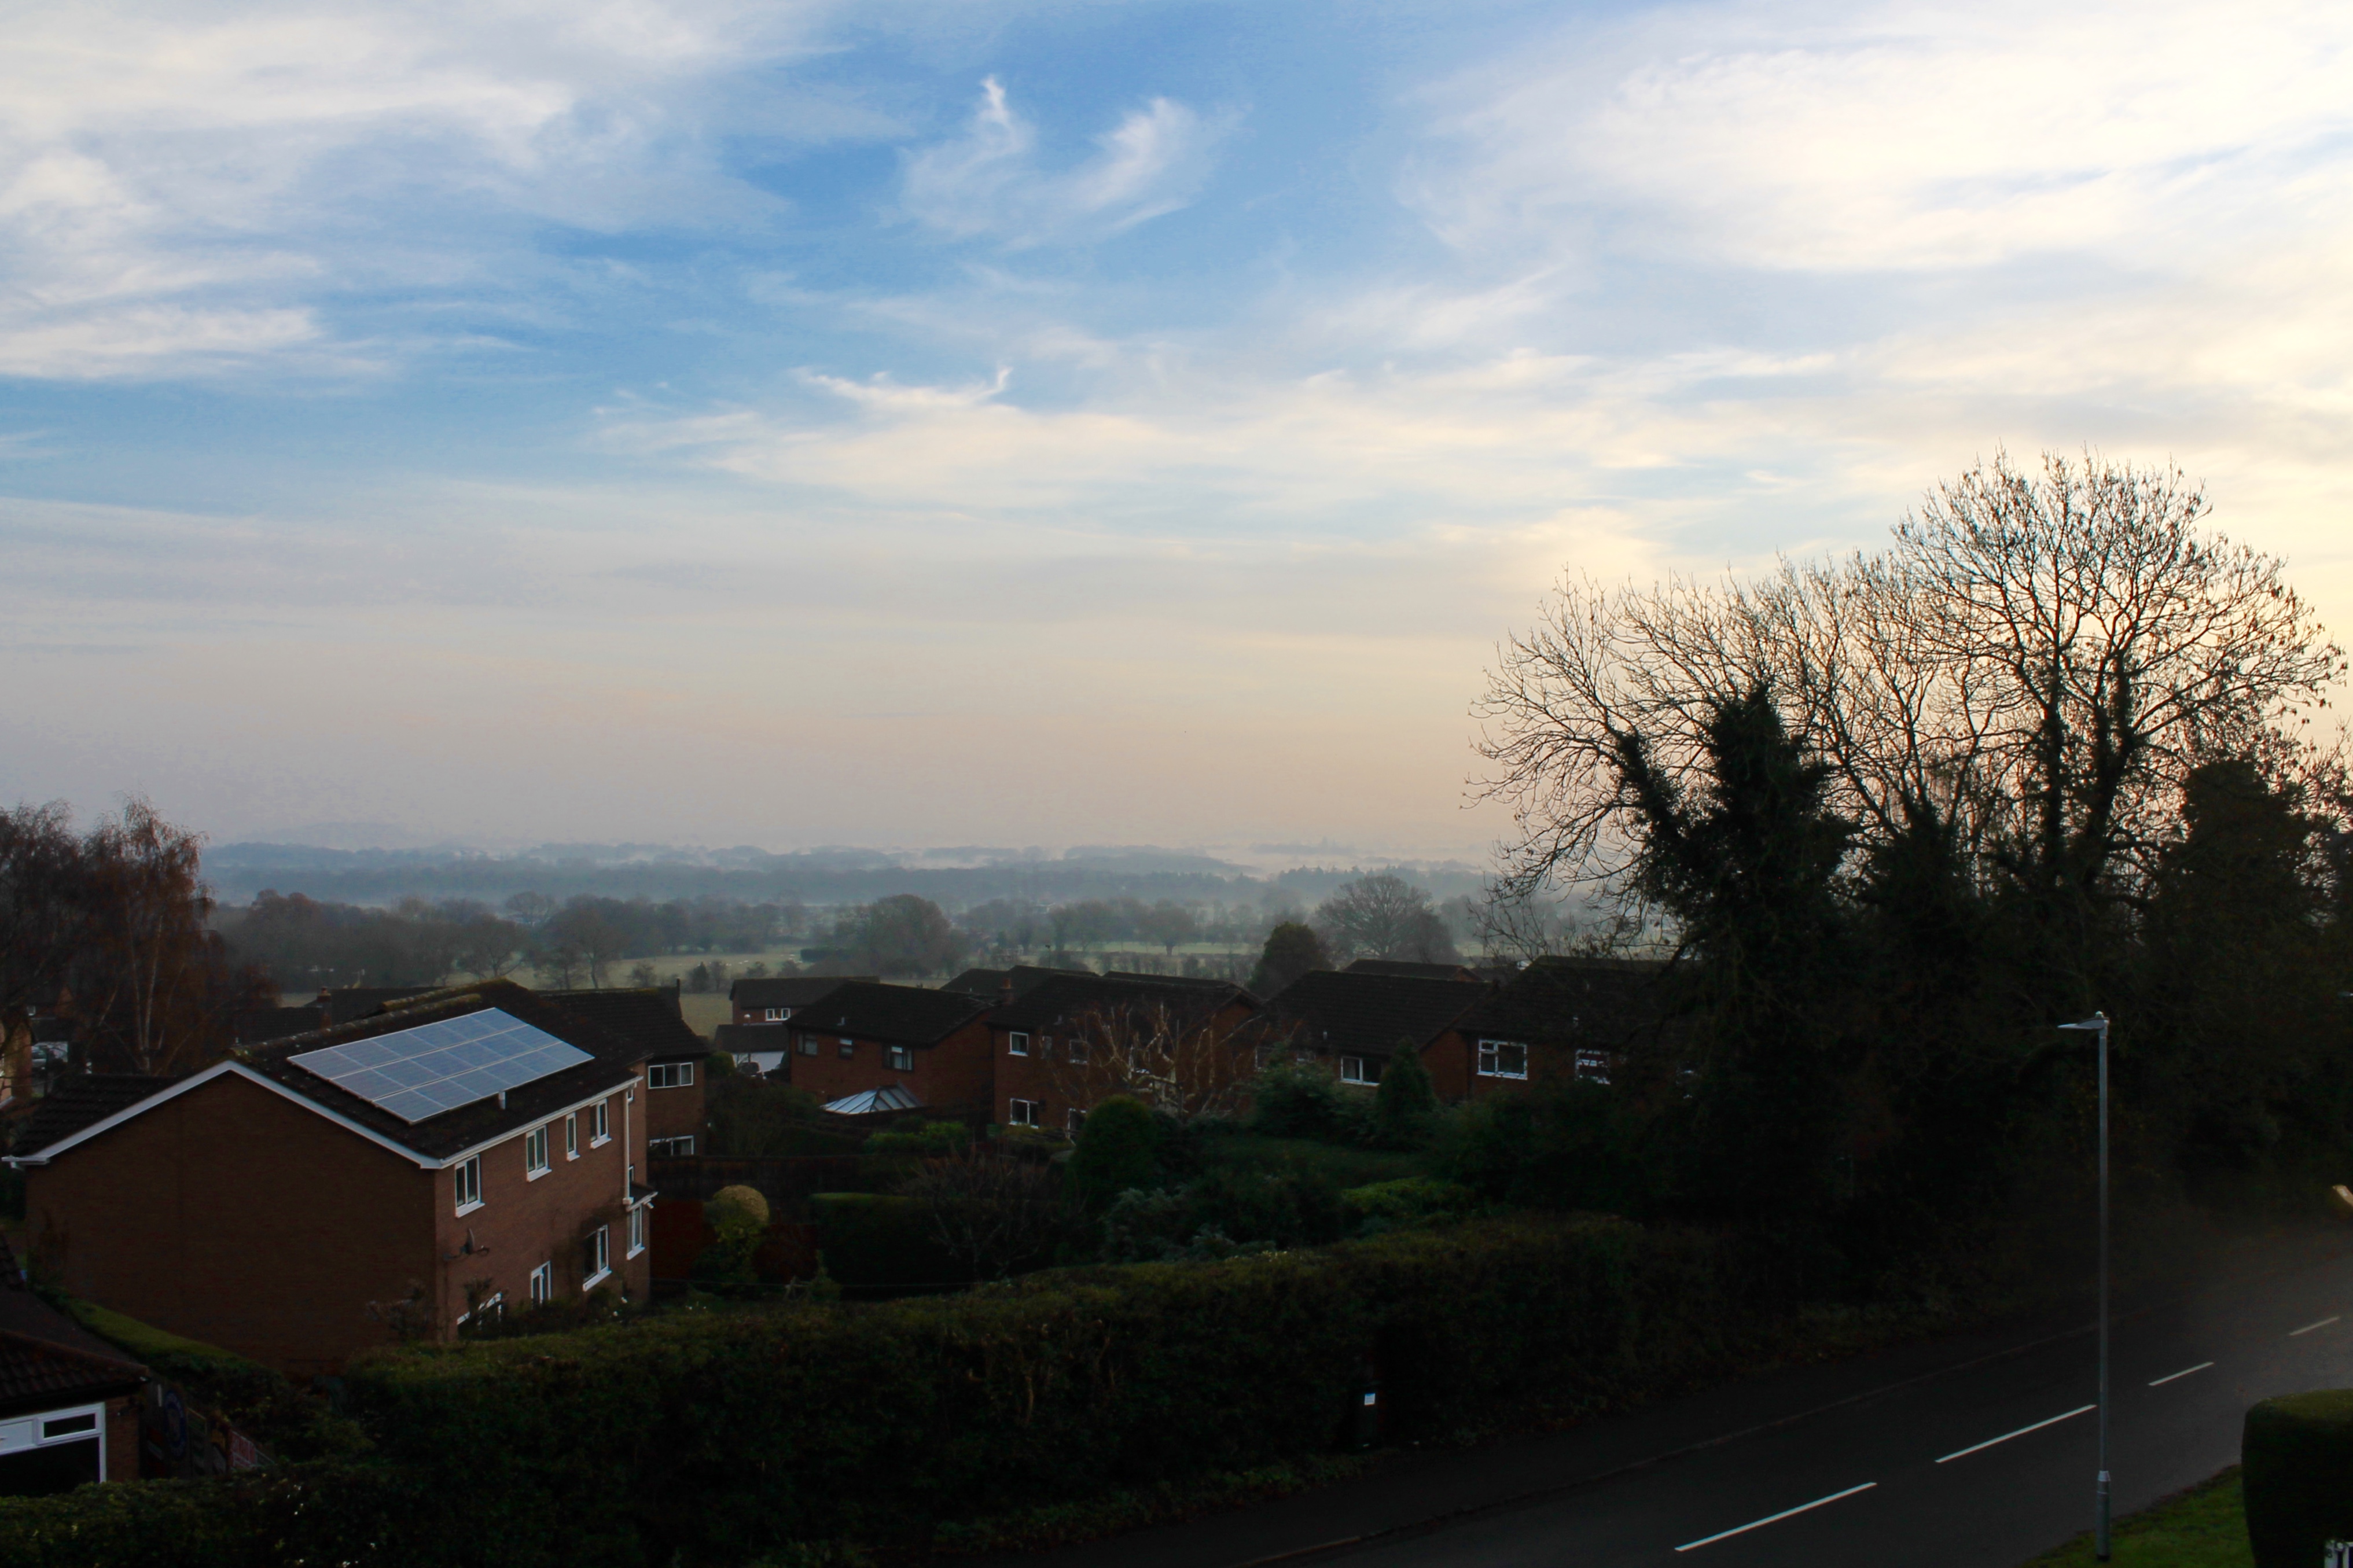 Sunrise over the Severn Valley.